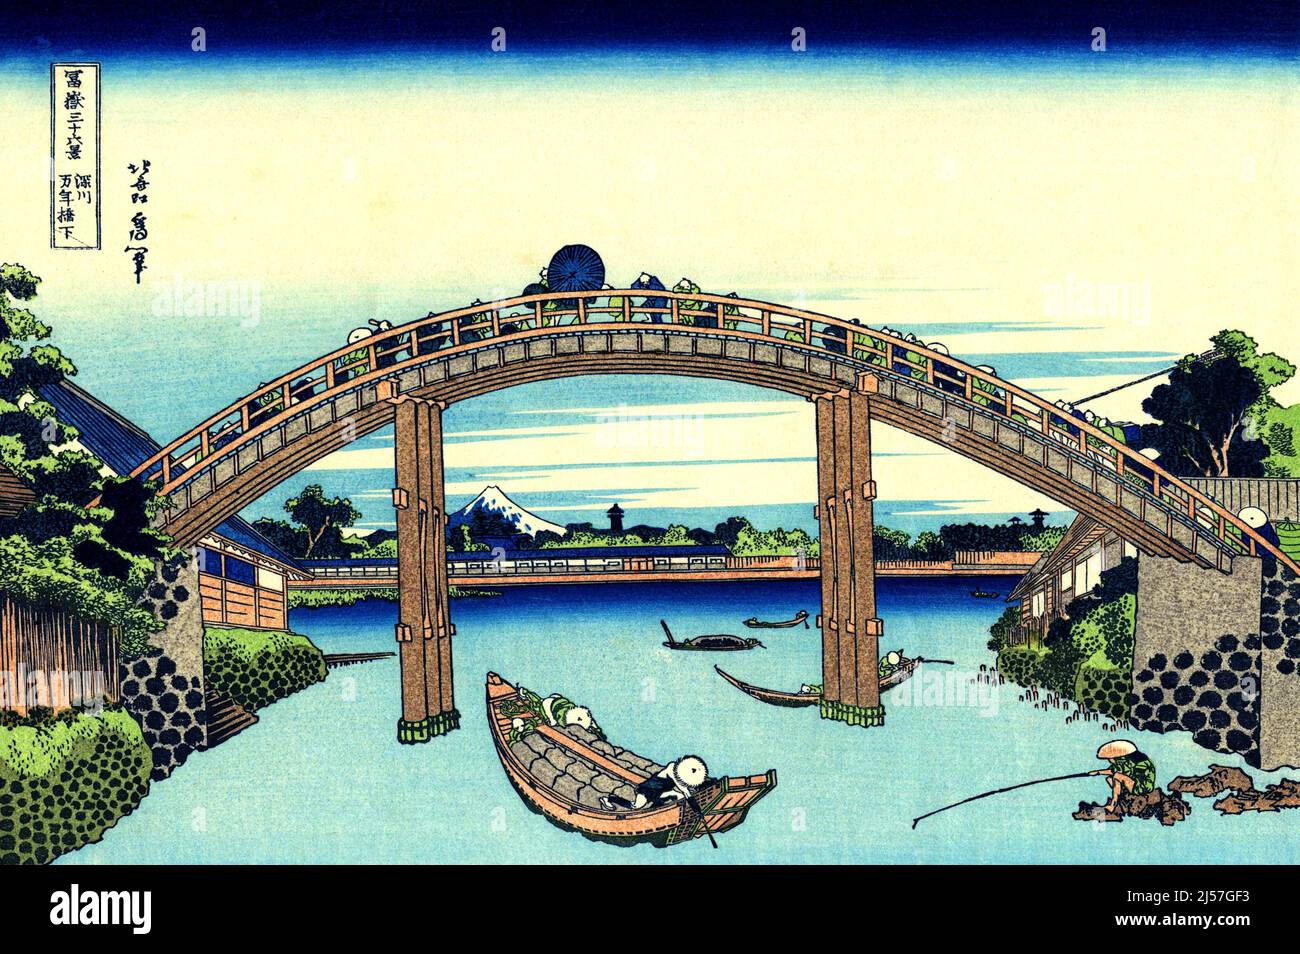 Japan: ‘Under Mannen Bridge at Fukagawa’. Ukiyo-e woodblock print from the series 'Thirty-six Views of Mount Fuji' by Katsushika Hokusai (31 October 1760 - 10 May 1849), c. 1830.  Mount Fuji is the highest mountain in Japan at 3,776.24 m (12,389 ft). An active stratovolcano that last erupted in 1707–08, Mount Fuji lies about 100 km southwest of Tokyo. Mount Fuji's exceptionally symmetrical cone is a well-known symbol and icon of Japan and is frequently depicted in art and photographs. It is one of Japan's ‘Three Holy Mountains’ along with Mount Tate and Mount Haku. Stock Photo